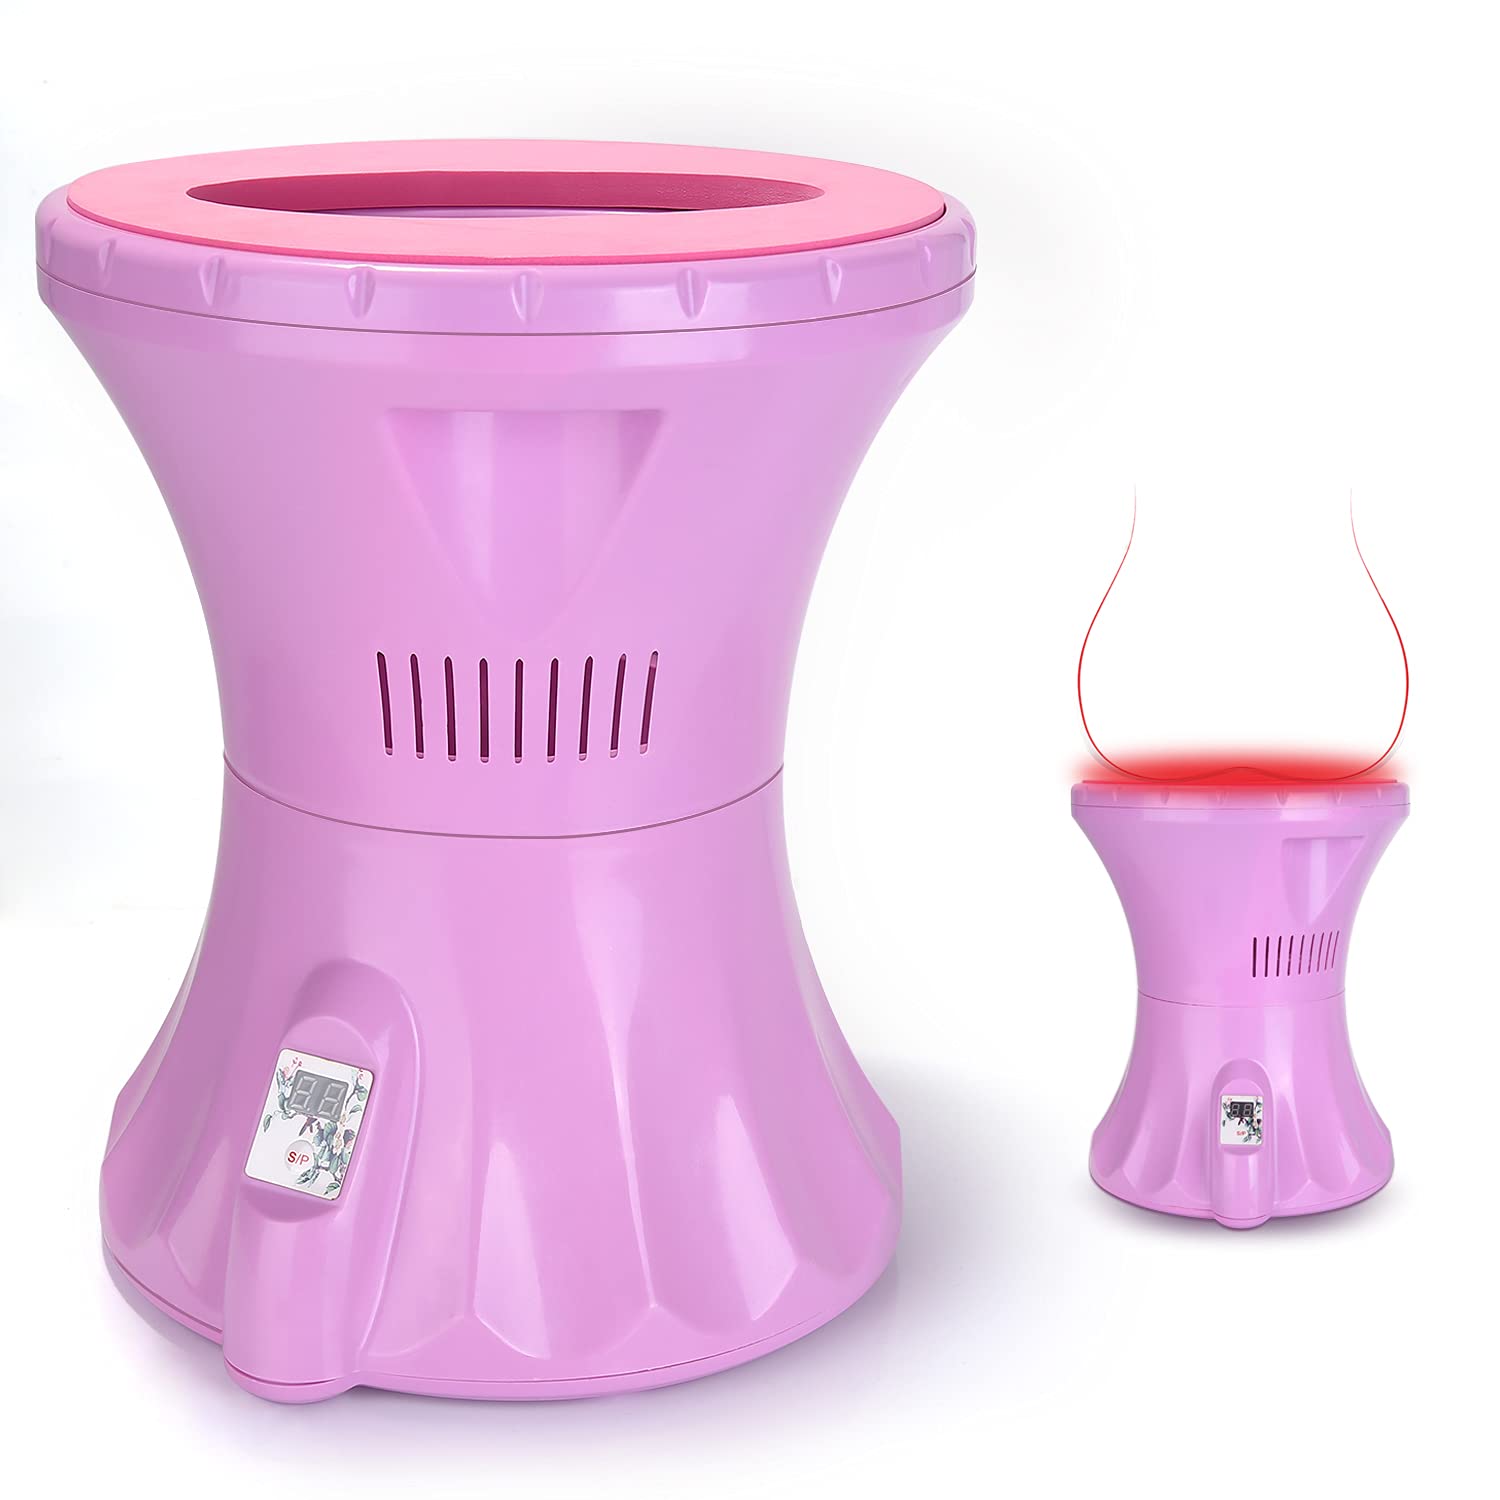 Yoni Steam Seat Women Personal Healthy Care Yoni Vaginal Steamer Chair, Vaginal Care Fumigation Vaginial Steaming Seat Instrument Sitting Fumigatio...